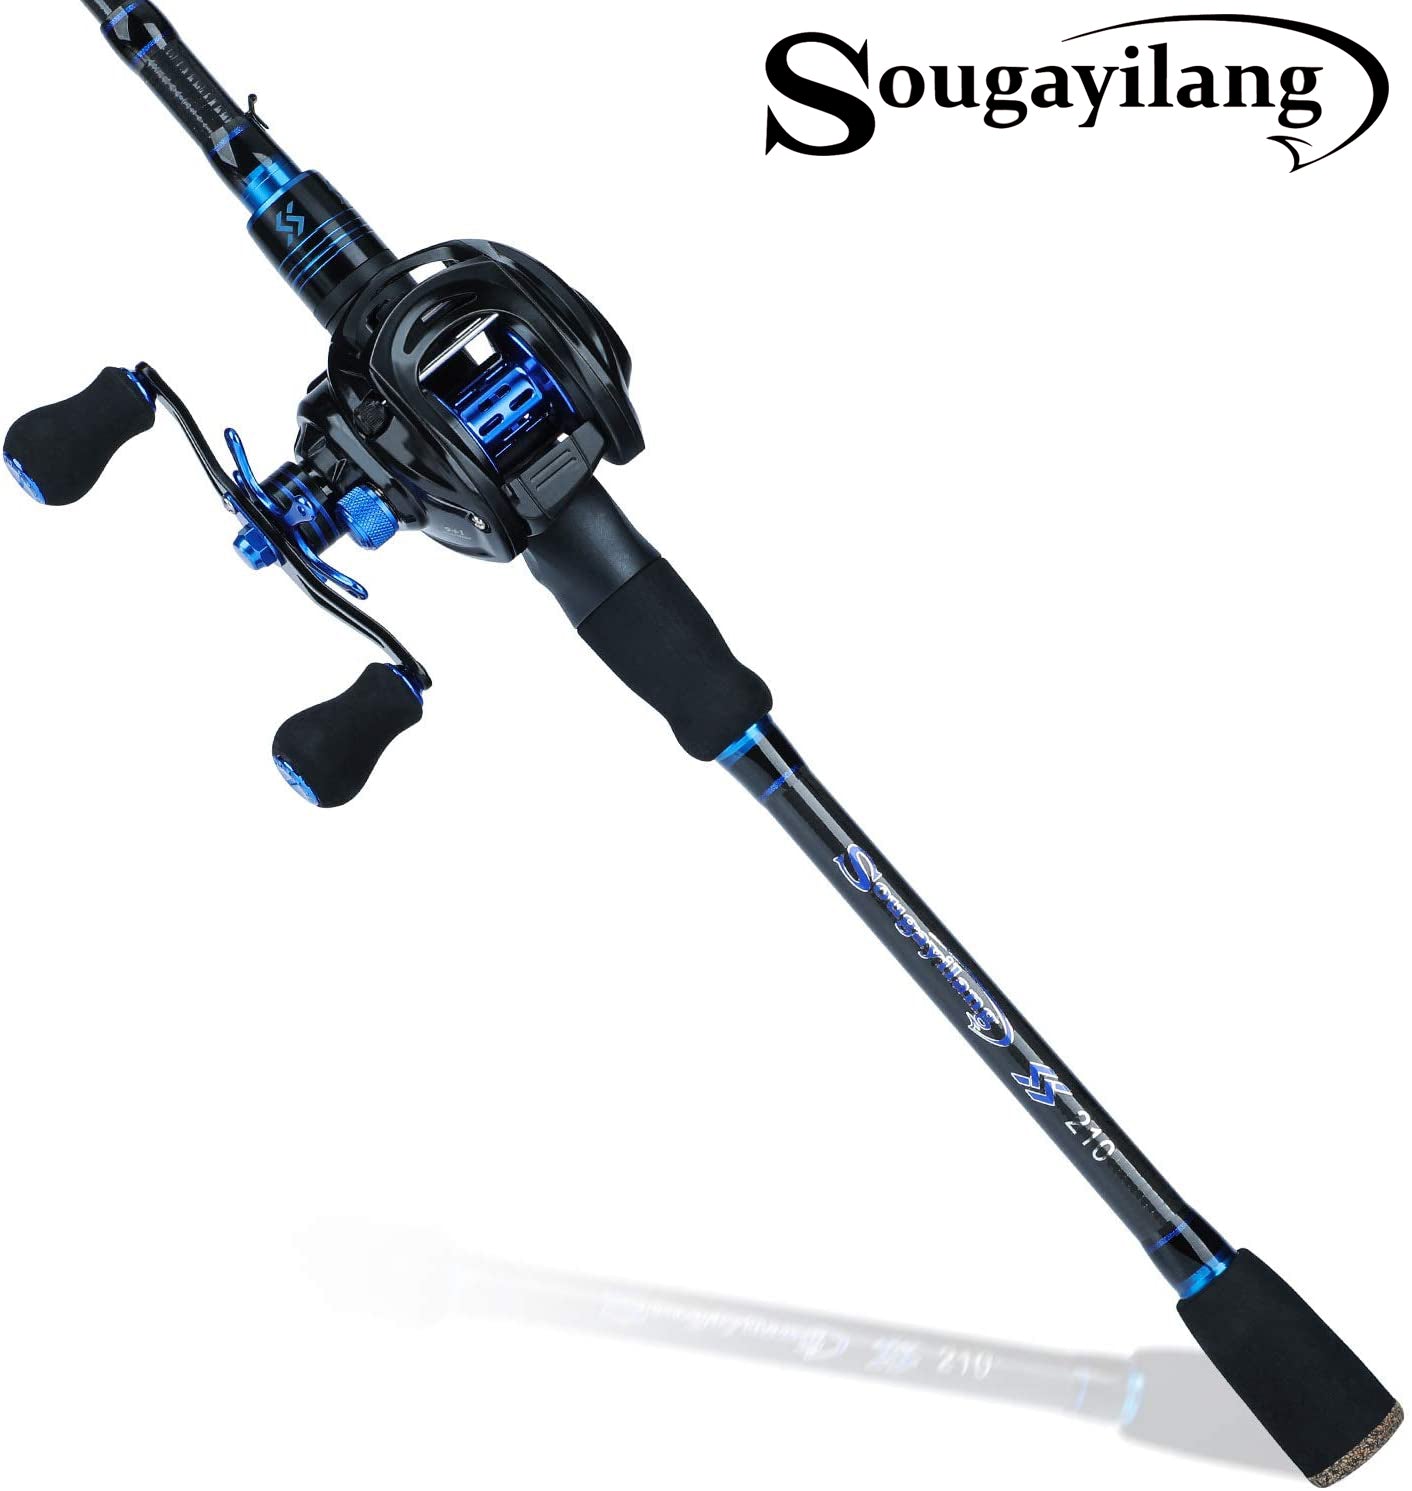 Sougayilang Baitcaster Combo Telescopic Fishing Rod and Reel Combo, Ultra  Light Baitcasting Fishing Reel for Travel Saltwater Freshwater with